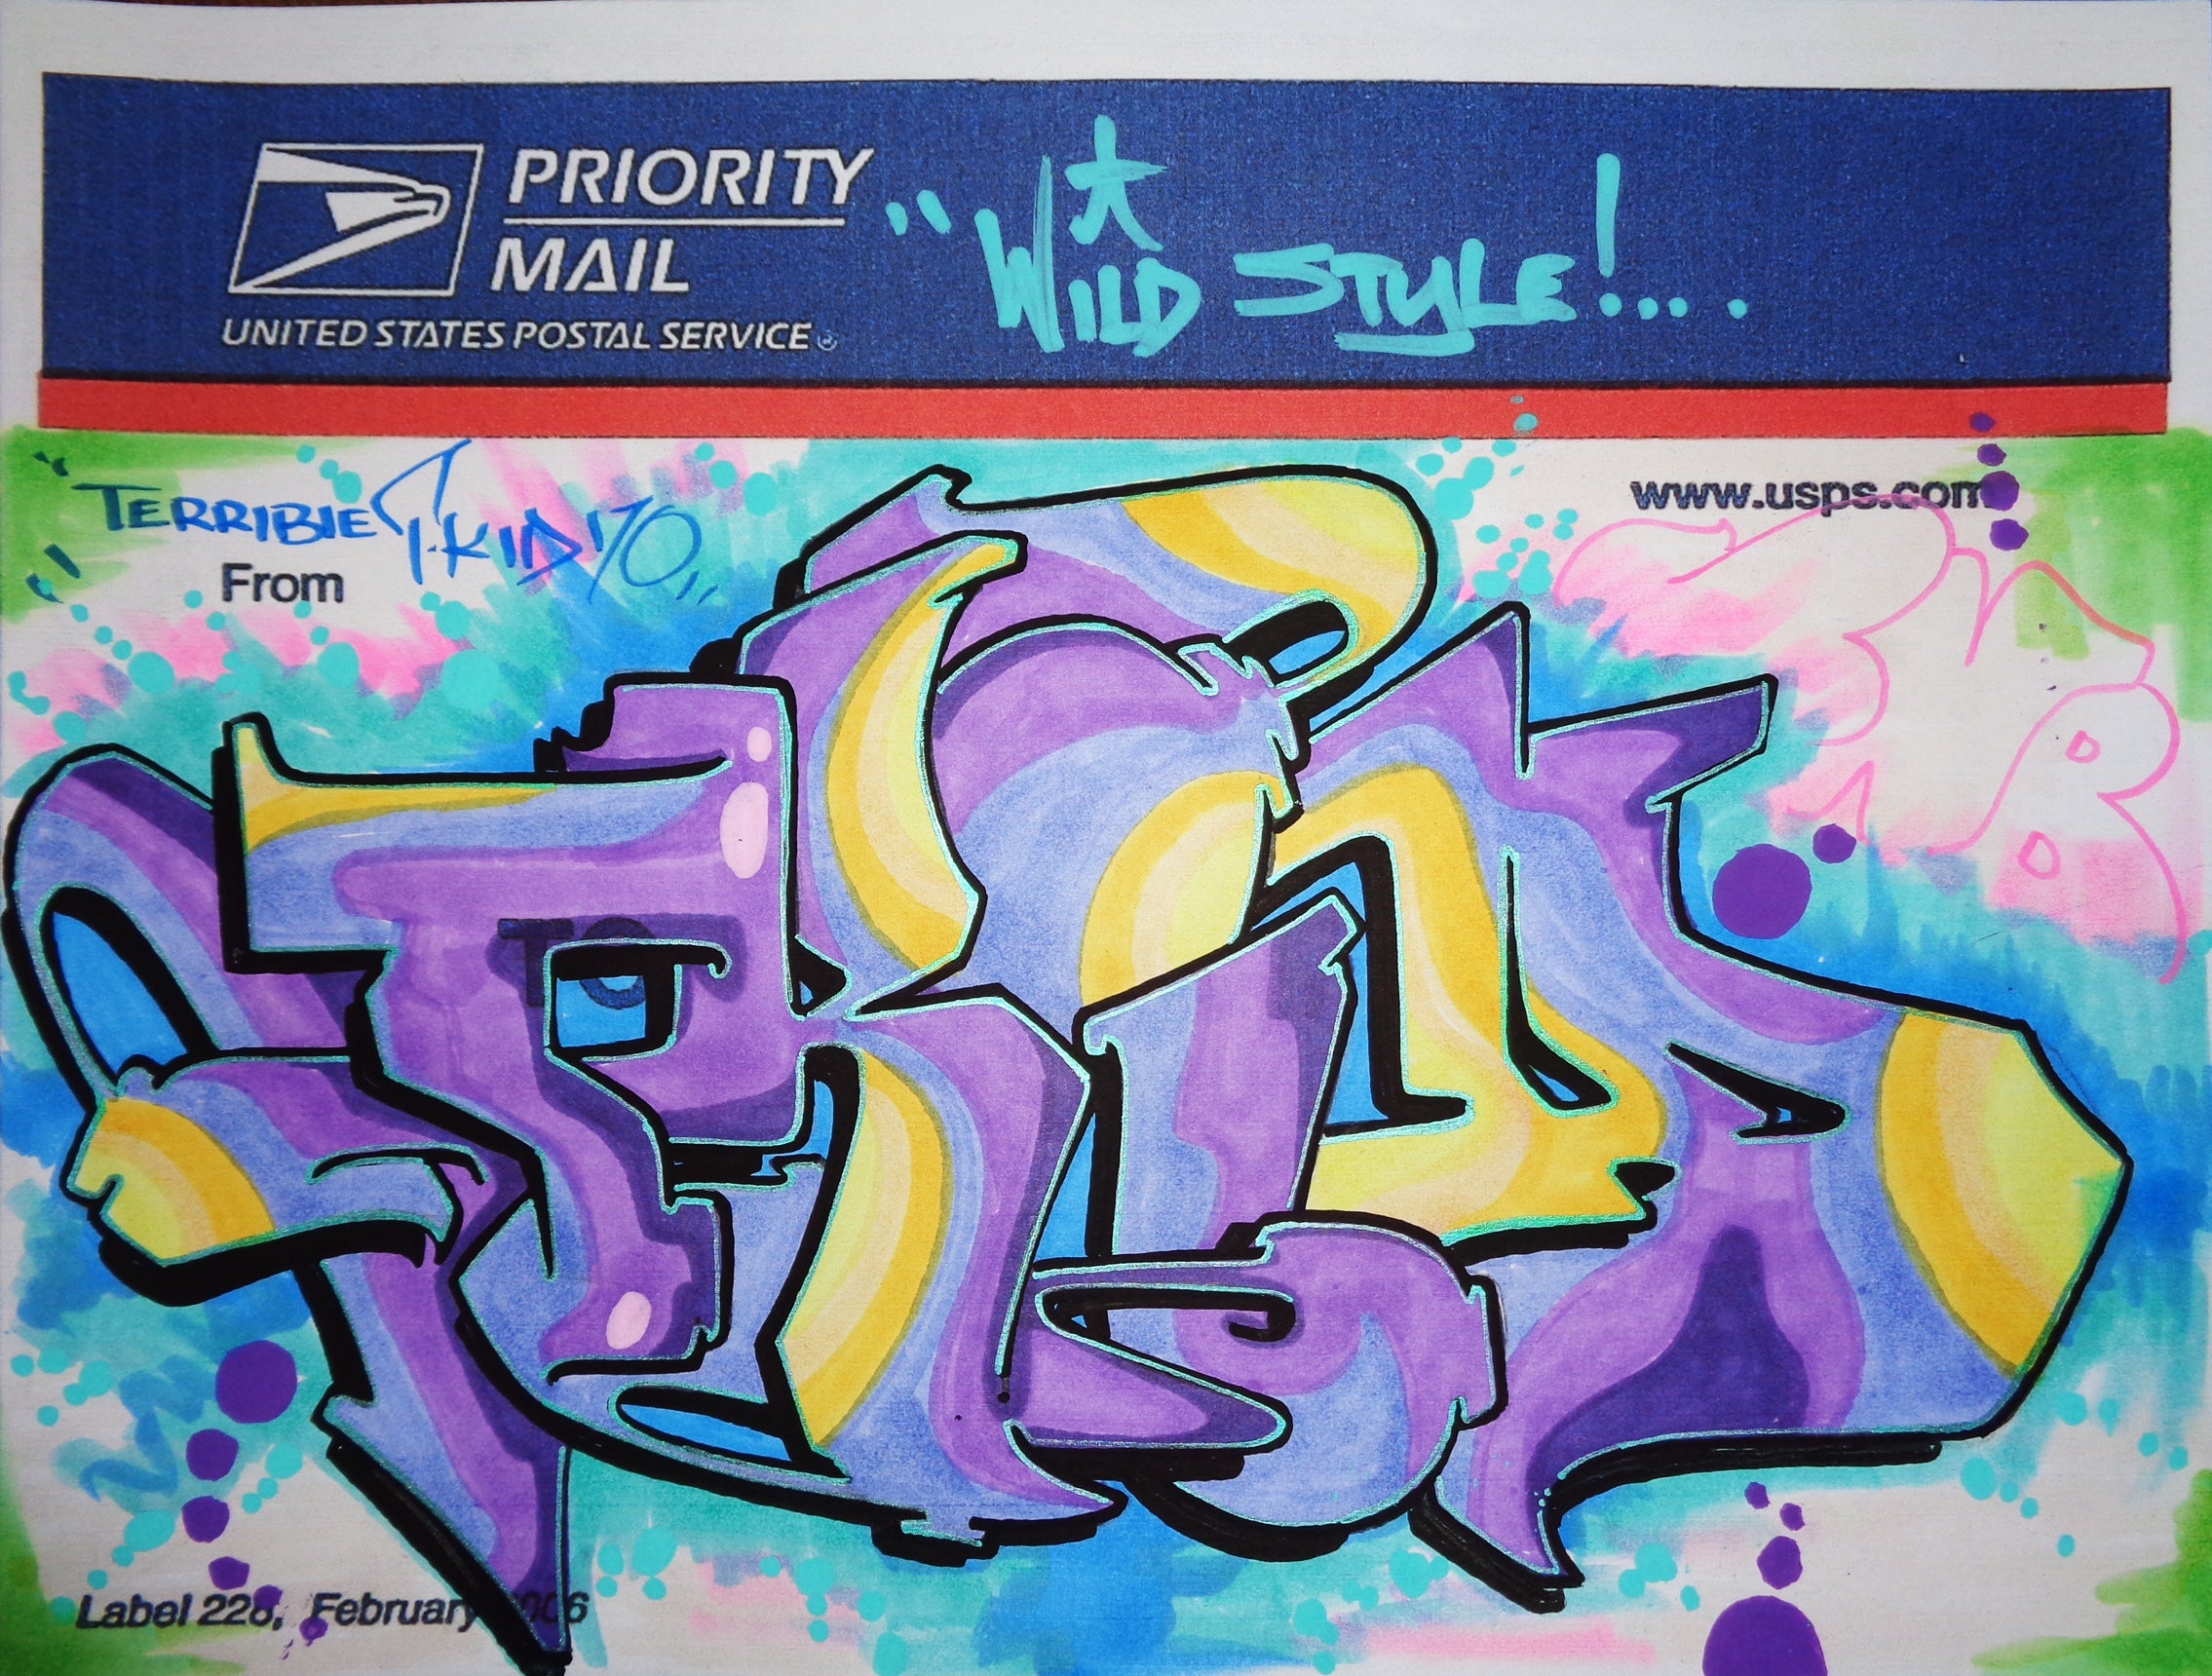 T-KID 170  - "Wild Style"  Priority Mail